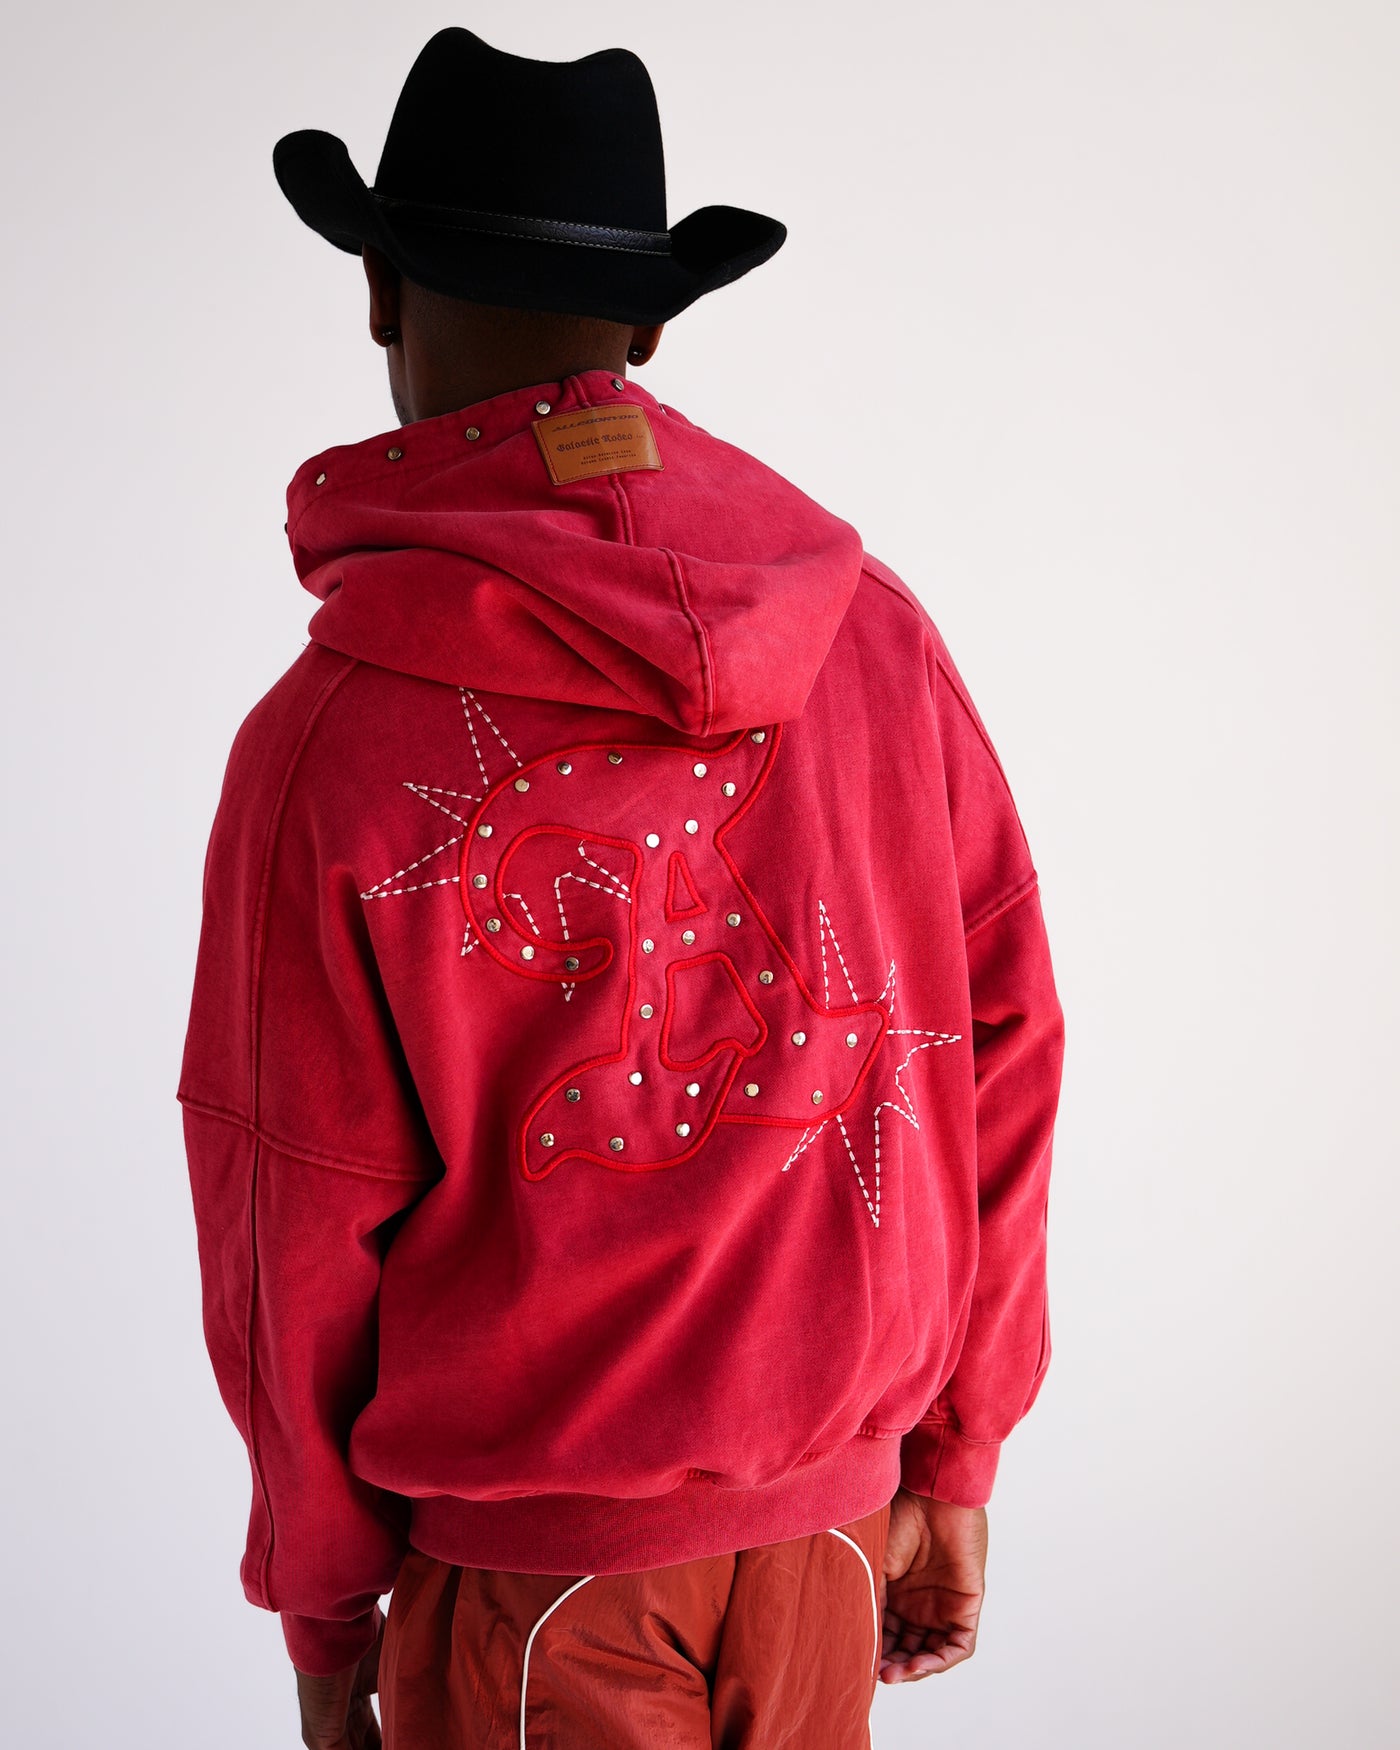 COWBOY STUD LUX HEAVYWEIGHT HOODIE / FADED RED